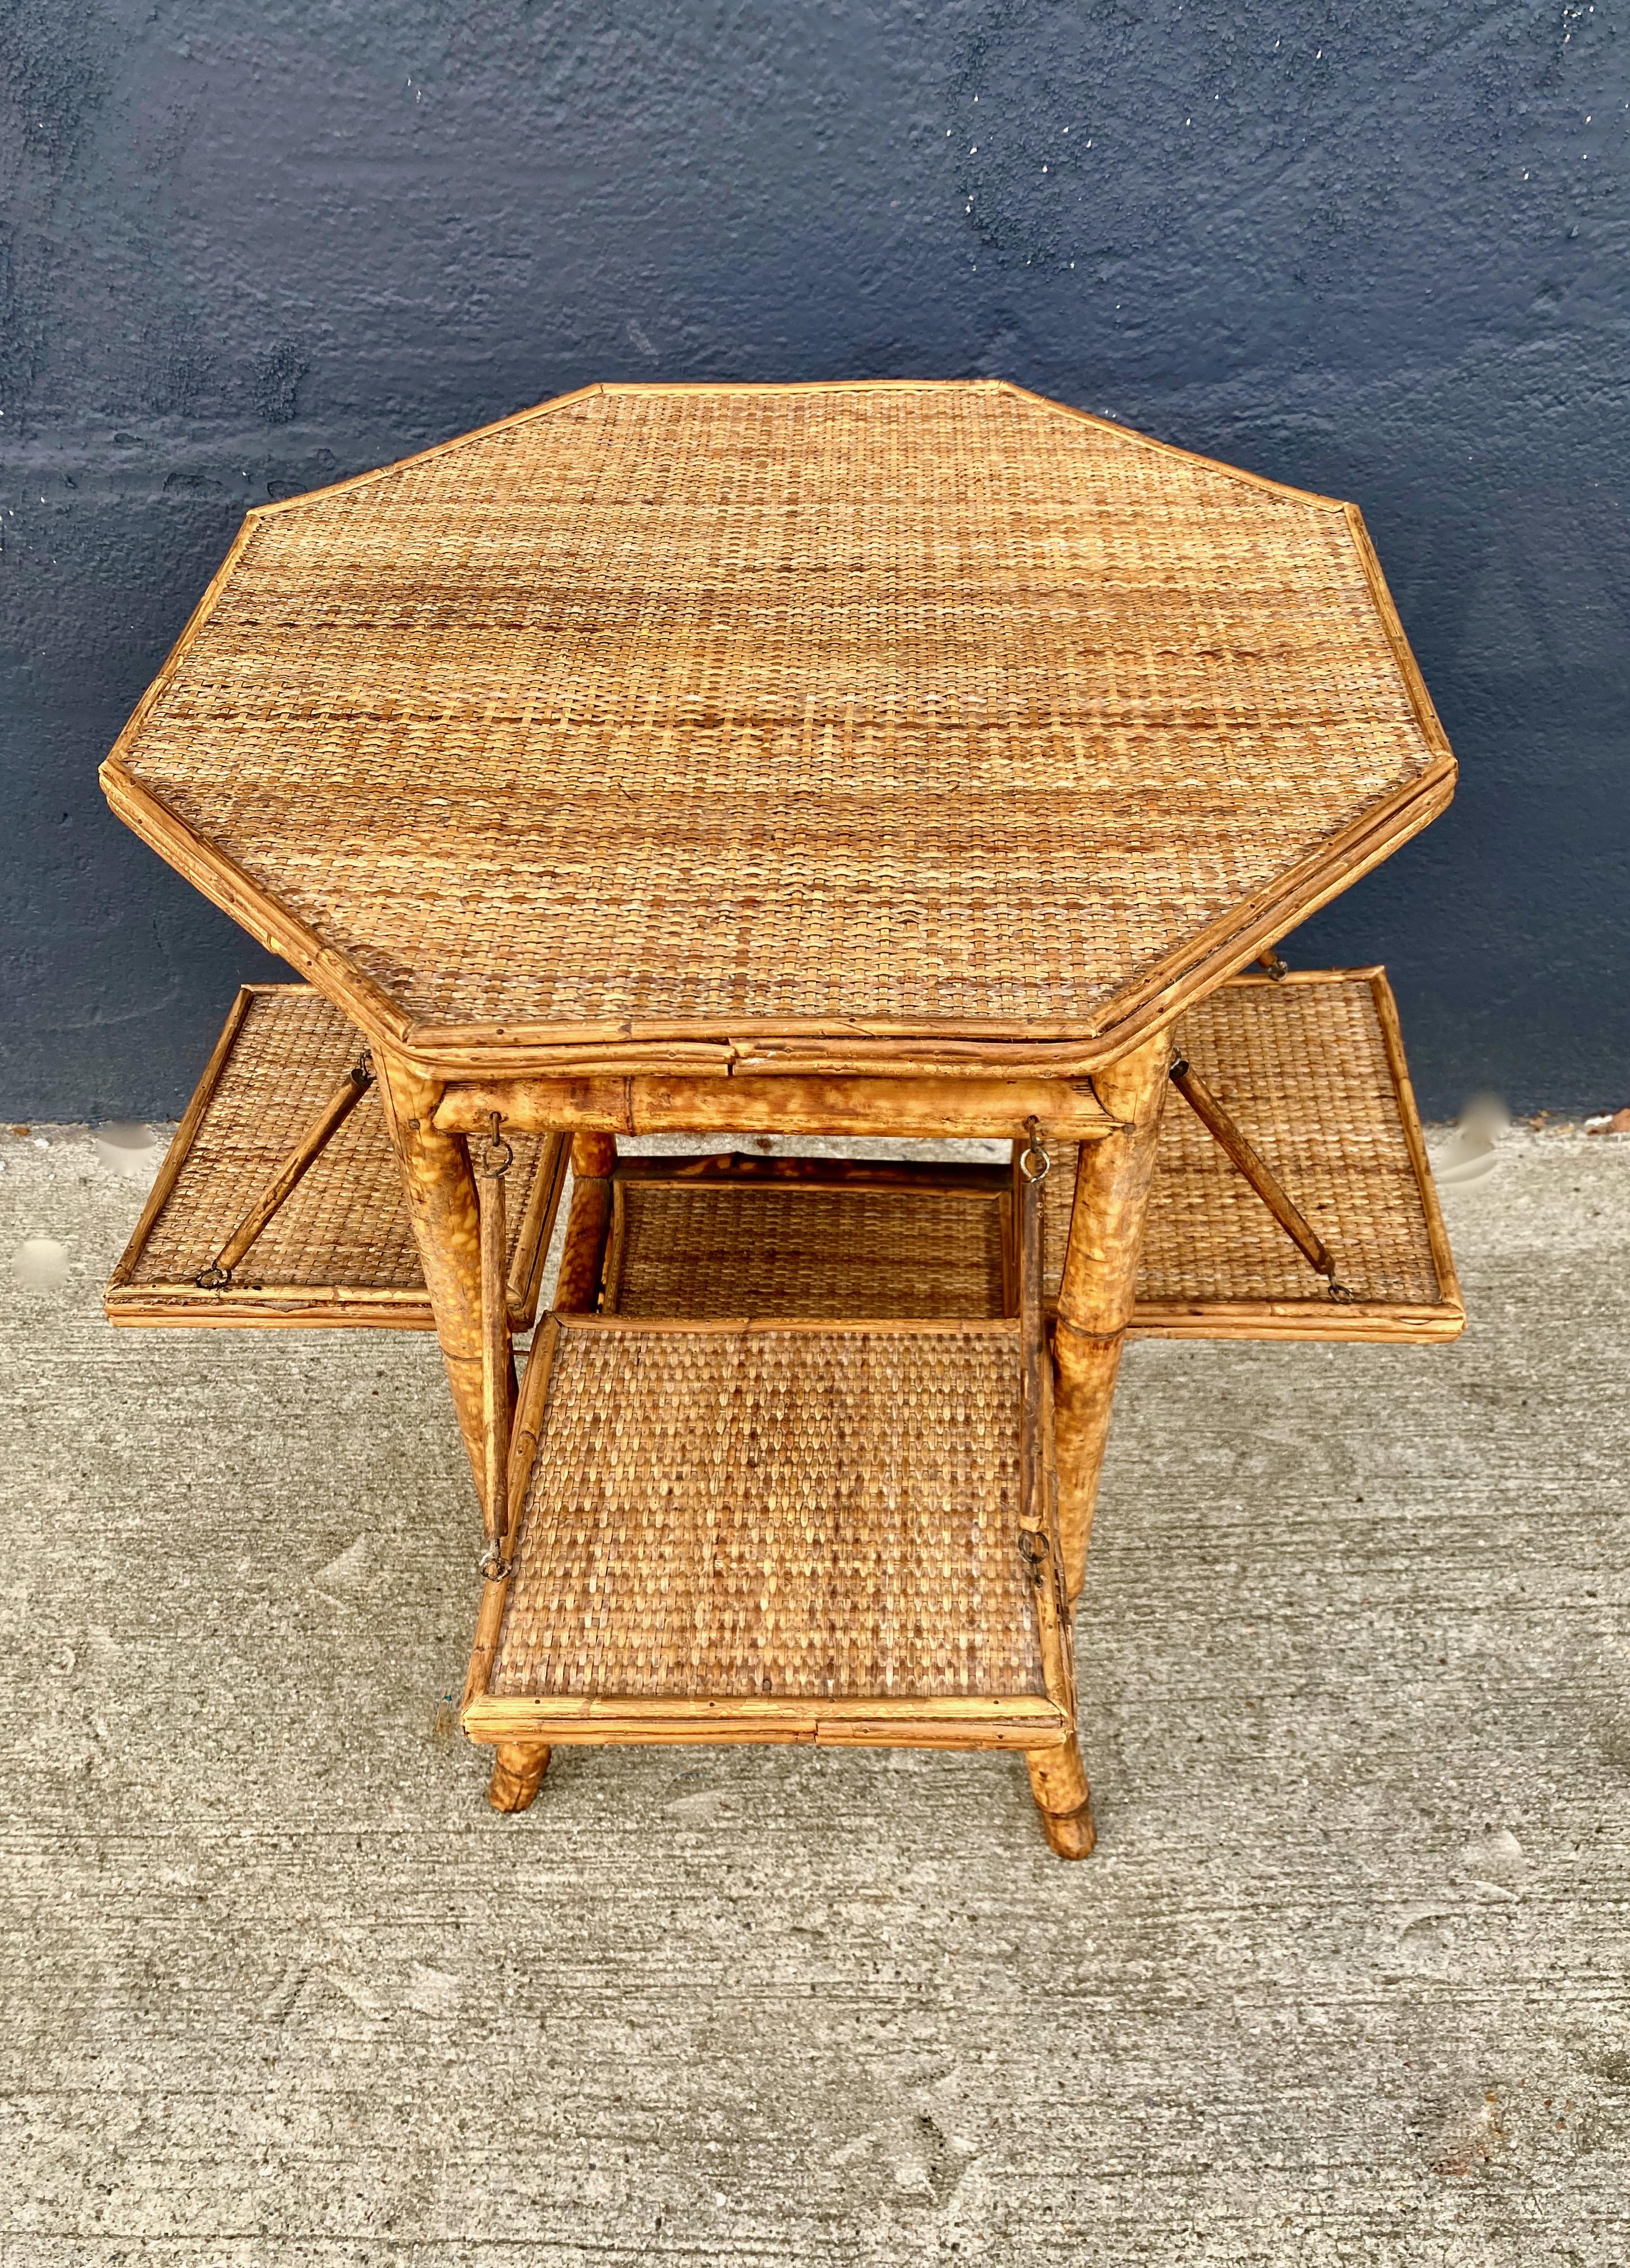 English Rattan and Bamboo Tea Table, C. 1900-1920 In Good Condition For Sale In Pasadena, CA